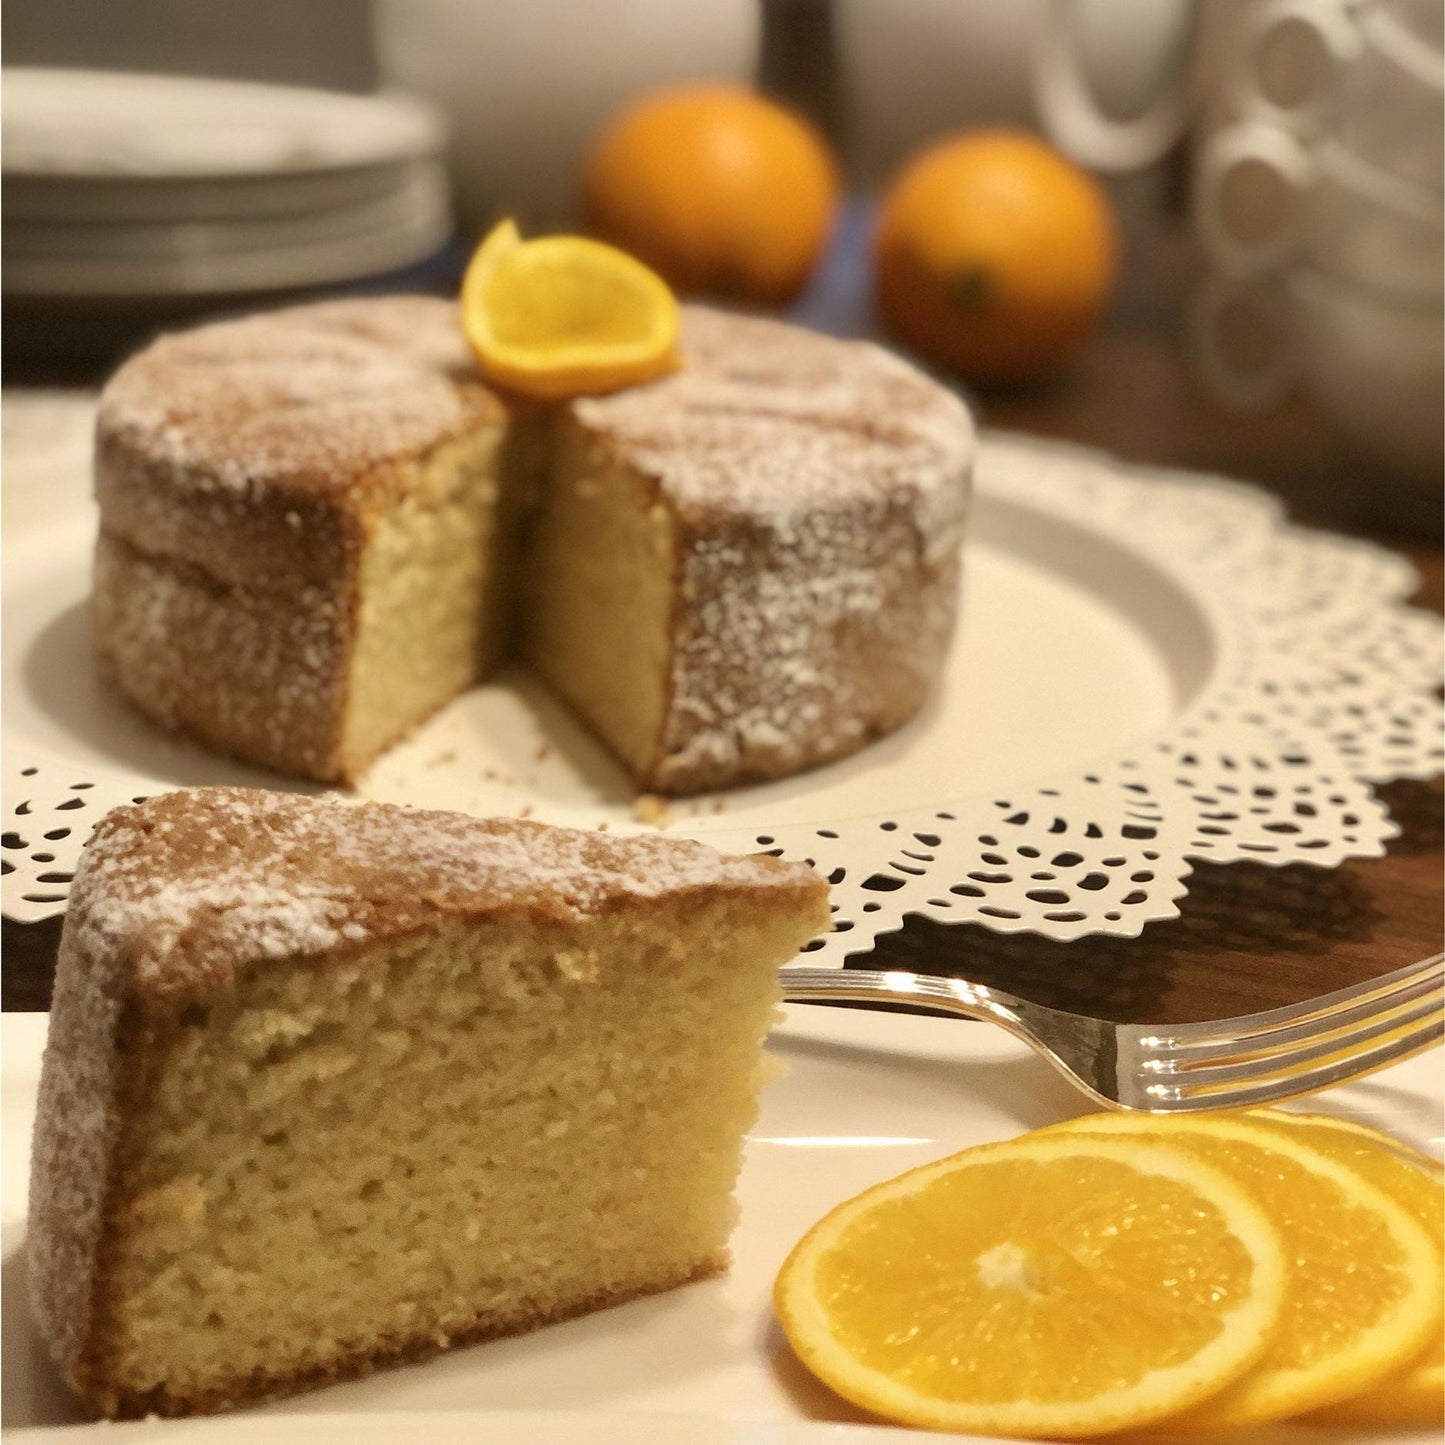 Tangy Florida Orange cake with caramel waterfall and toasted almond topping, a citrusy, sugar, dairy and gluten-free treat. Full Life Gourmet Bakery